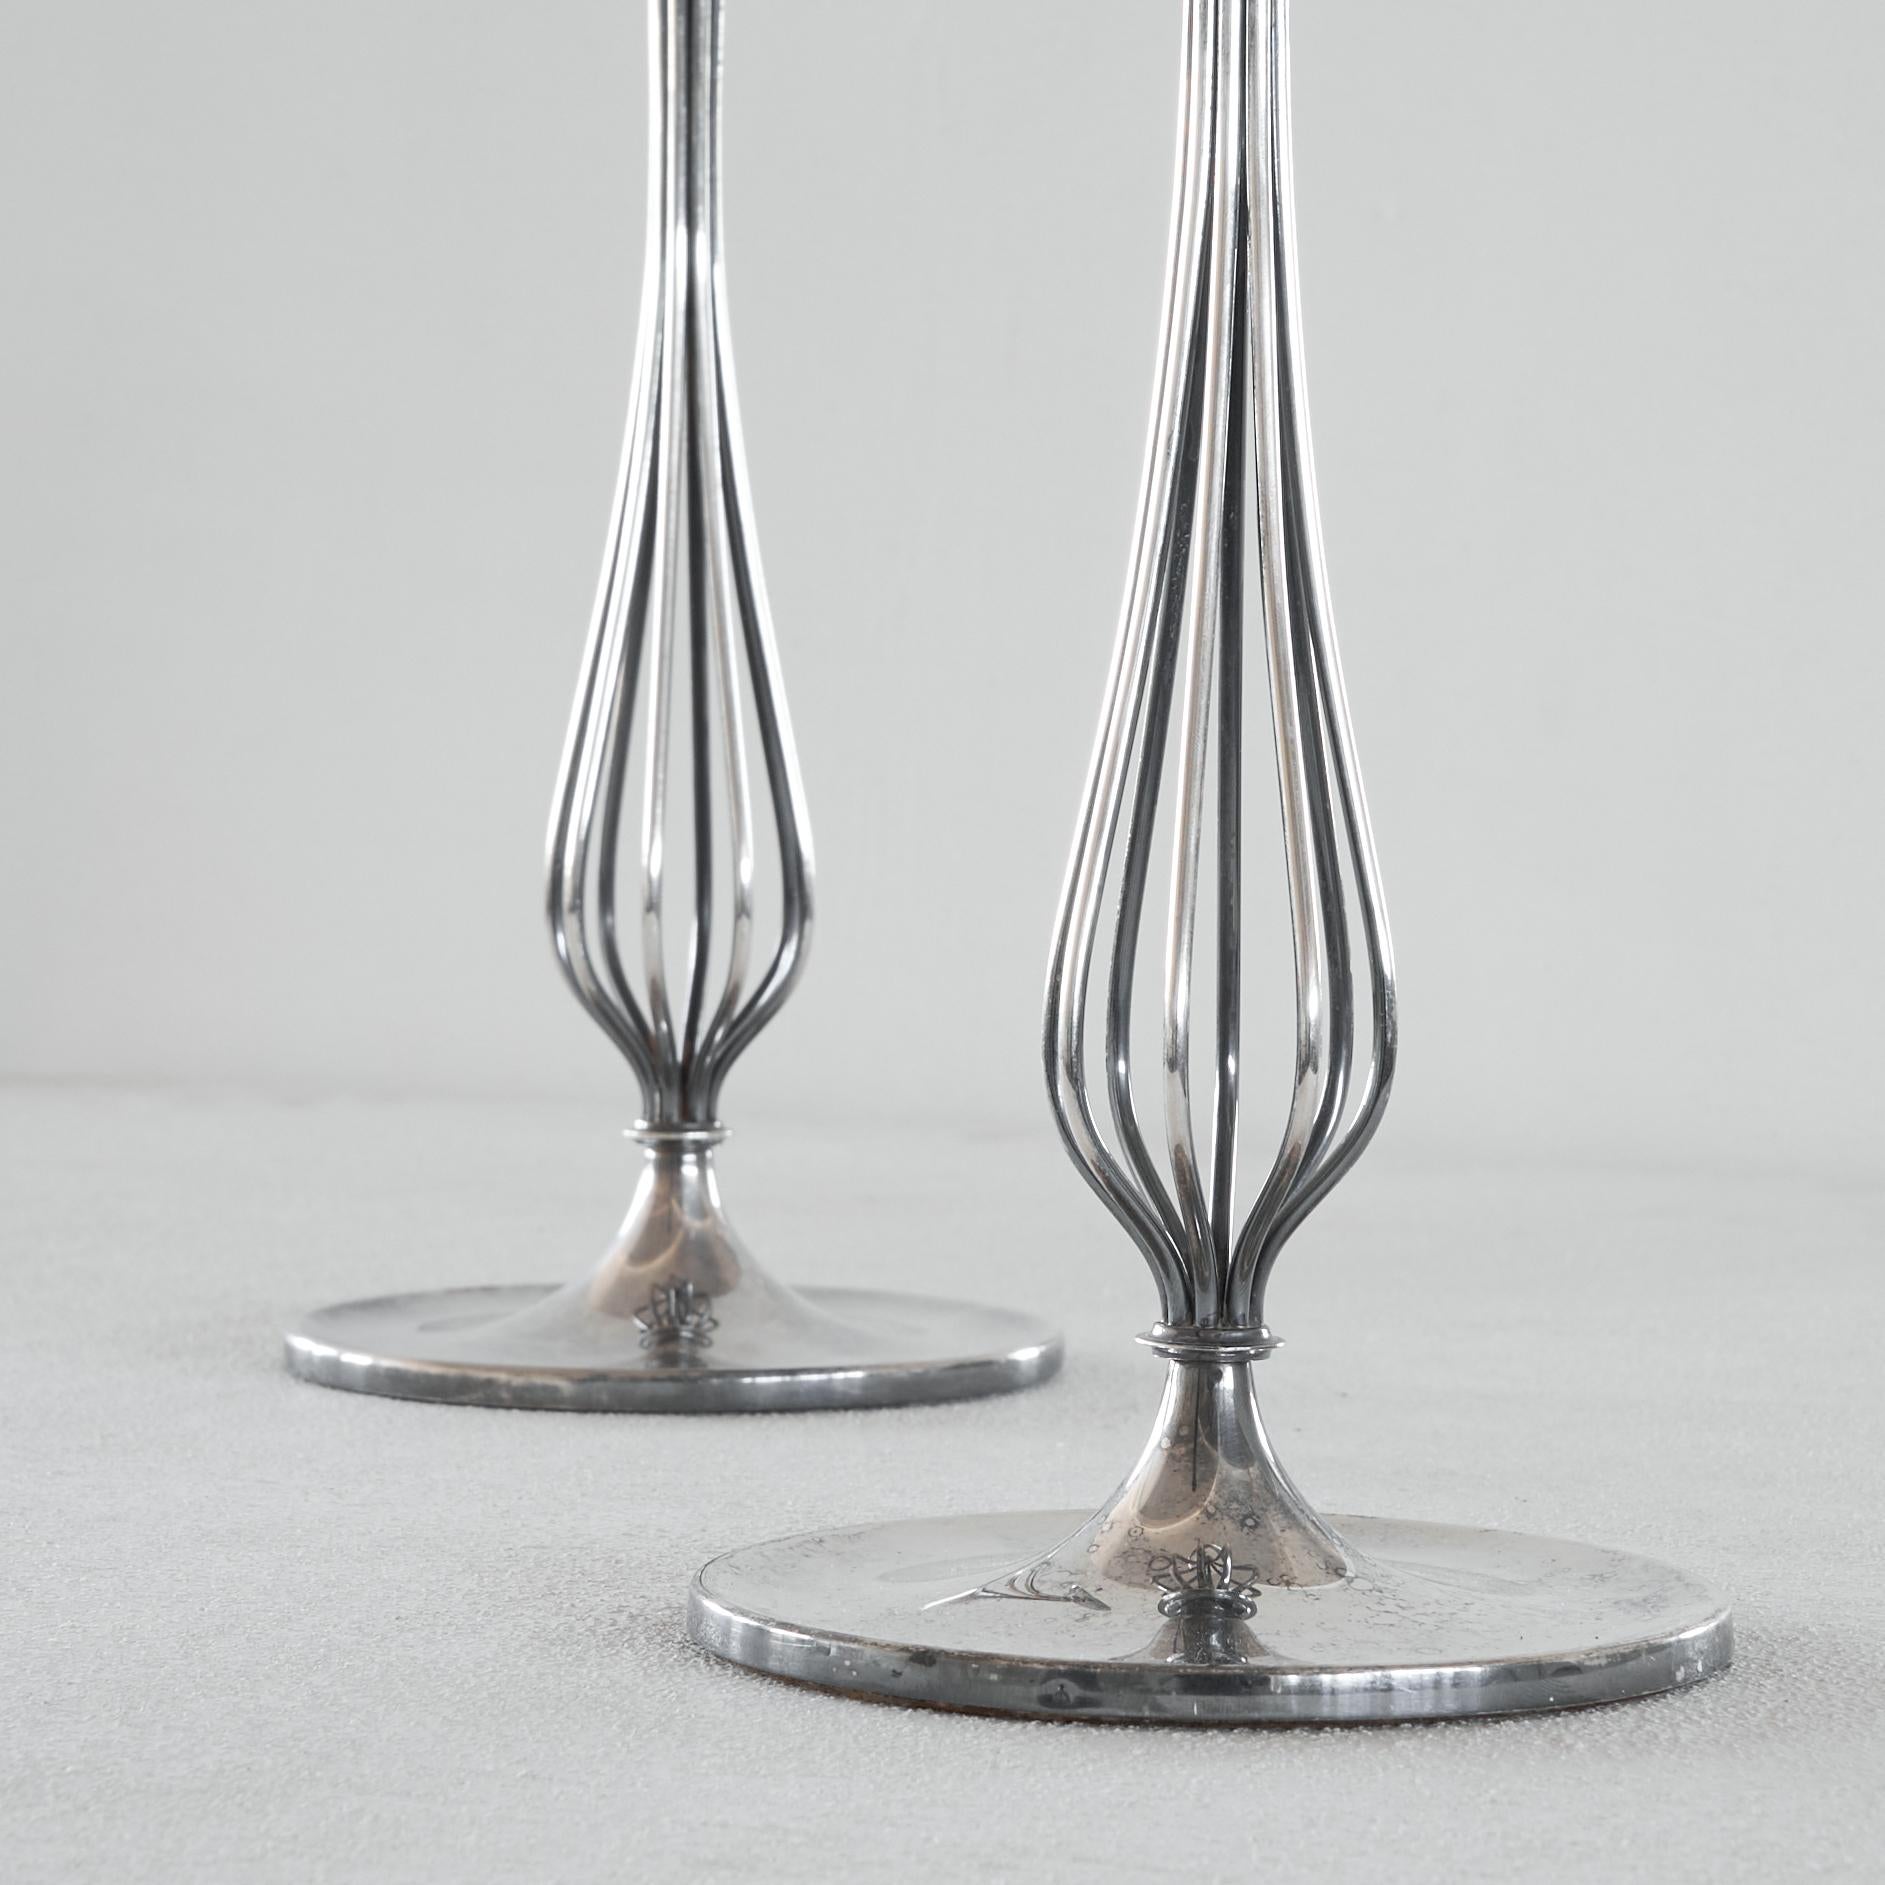 Gustav Beran Pair of Silver Plated Candle Holders Van Kempen & Begeer 1960s In Good Condition For Sale In Tilburg, NL